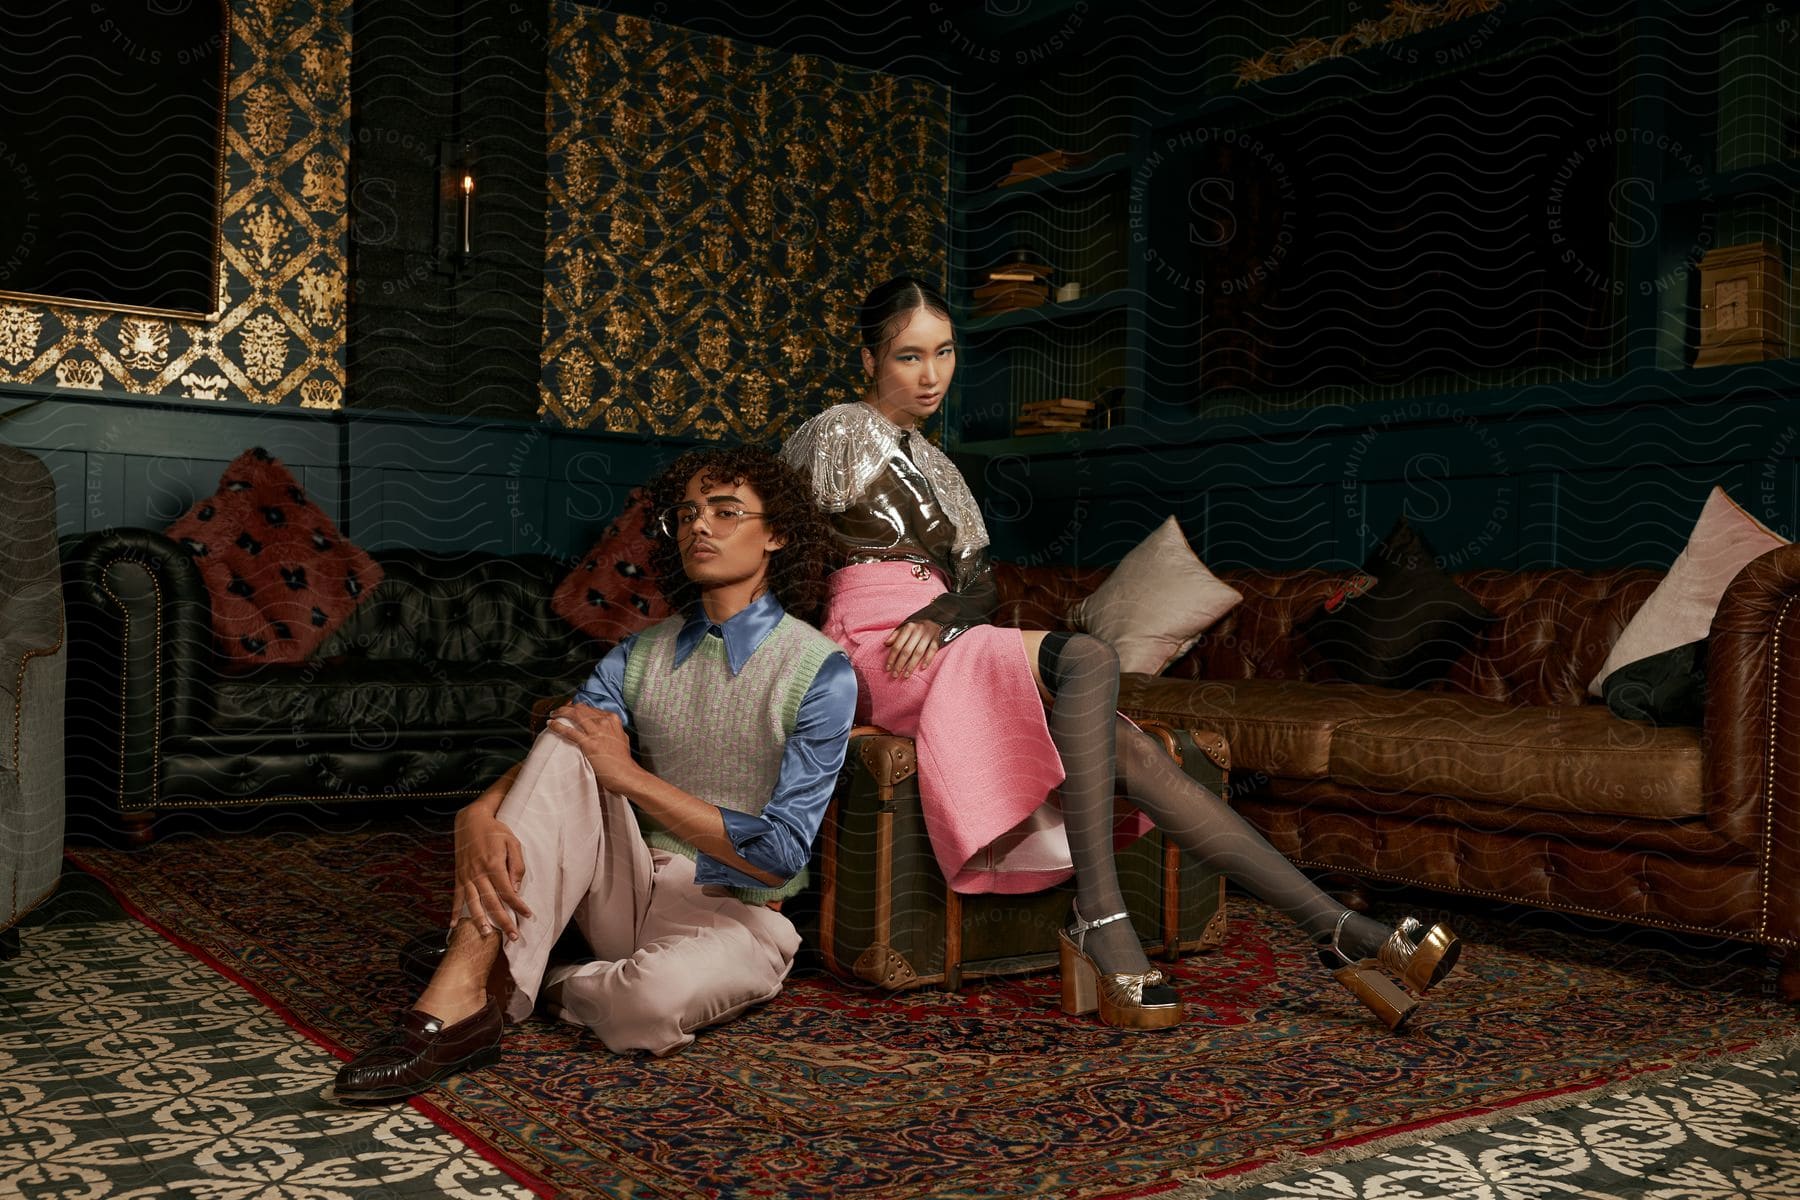 A girl sits on a large trunk in the middle of a living room, while a boy sits beside the trunk.